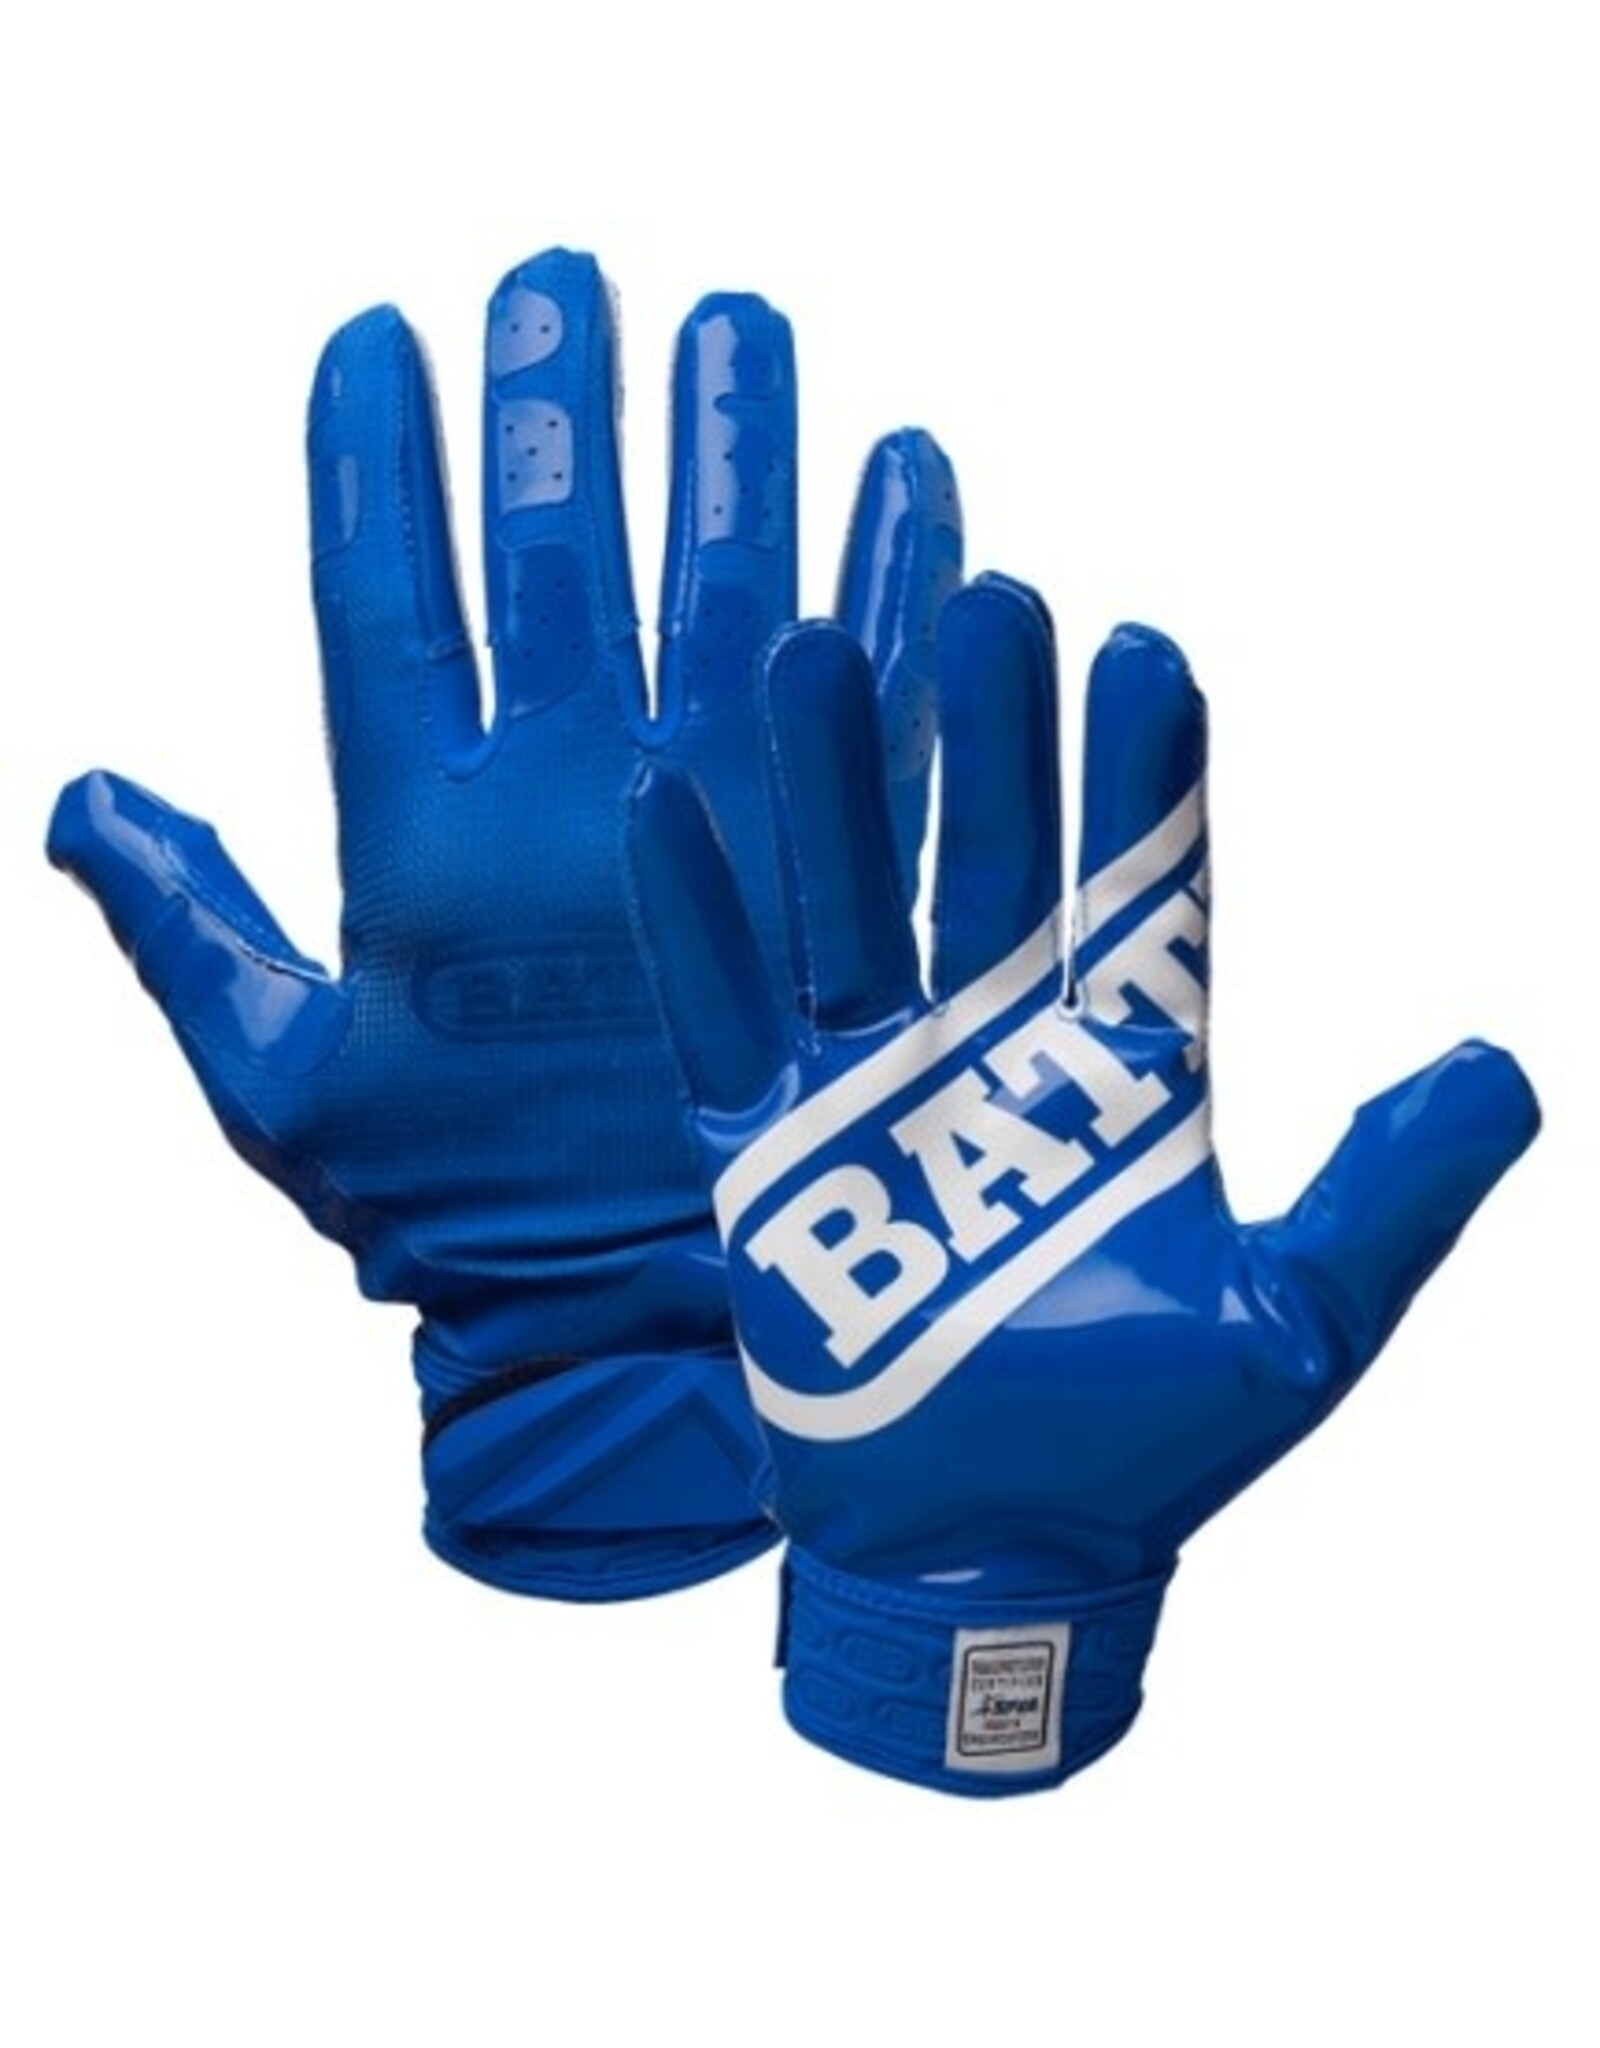 Battle Double Threat Receiver Football Gloves - Adult